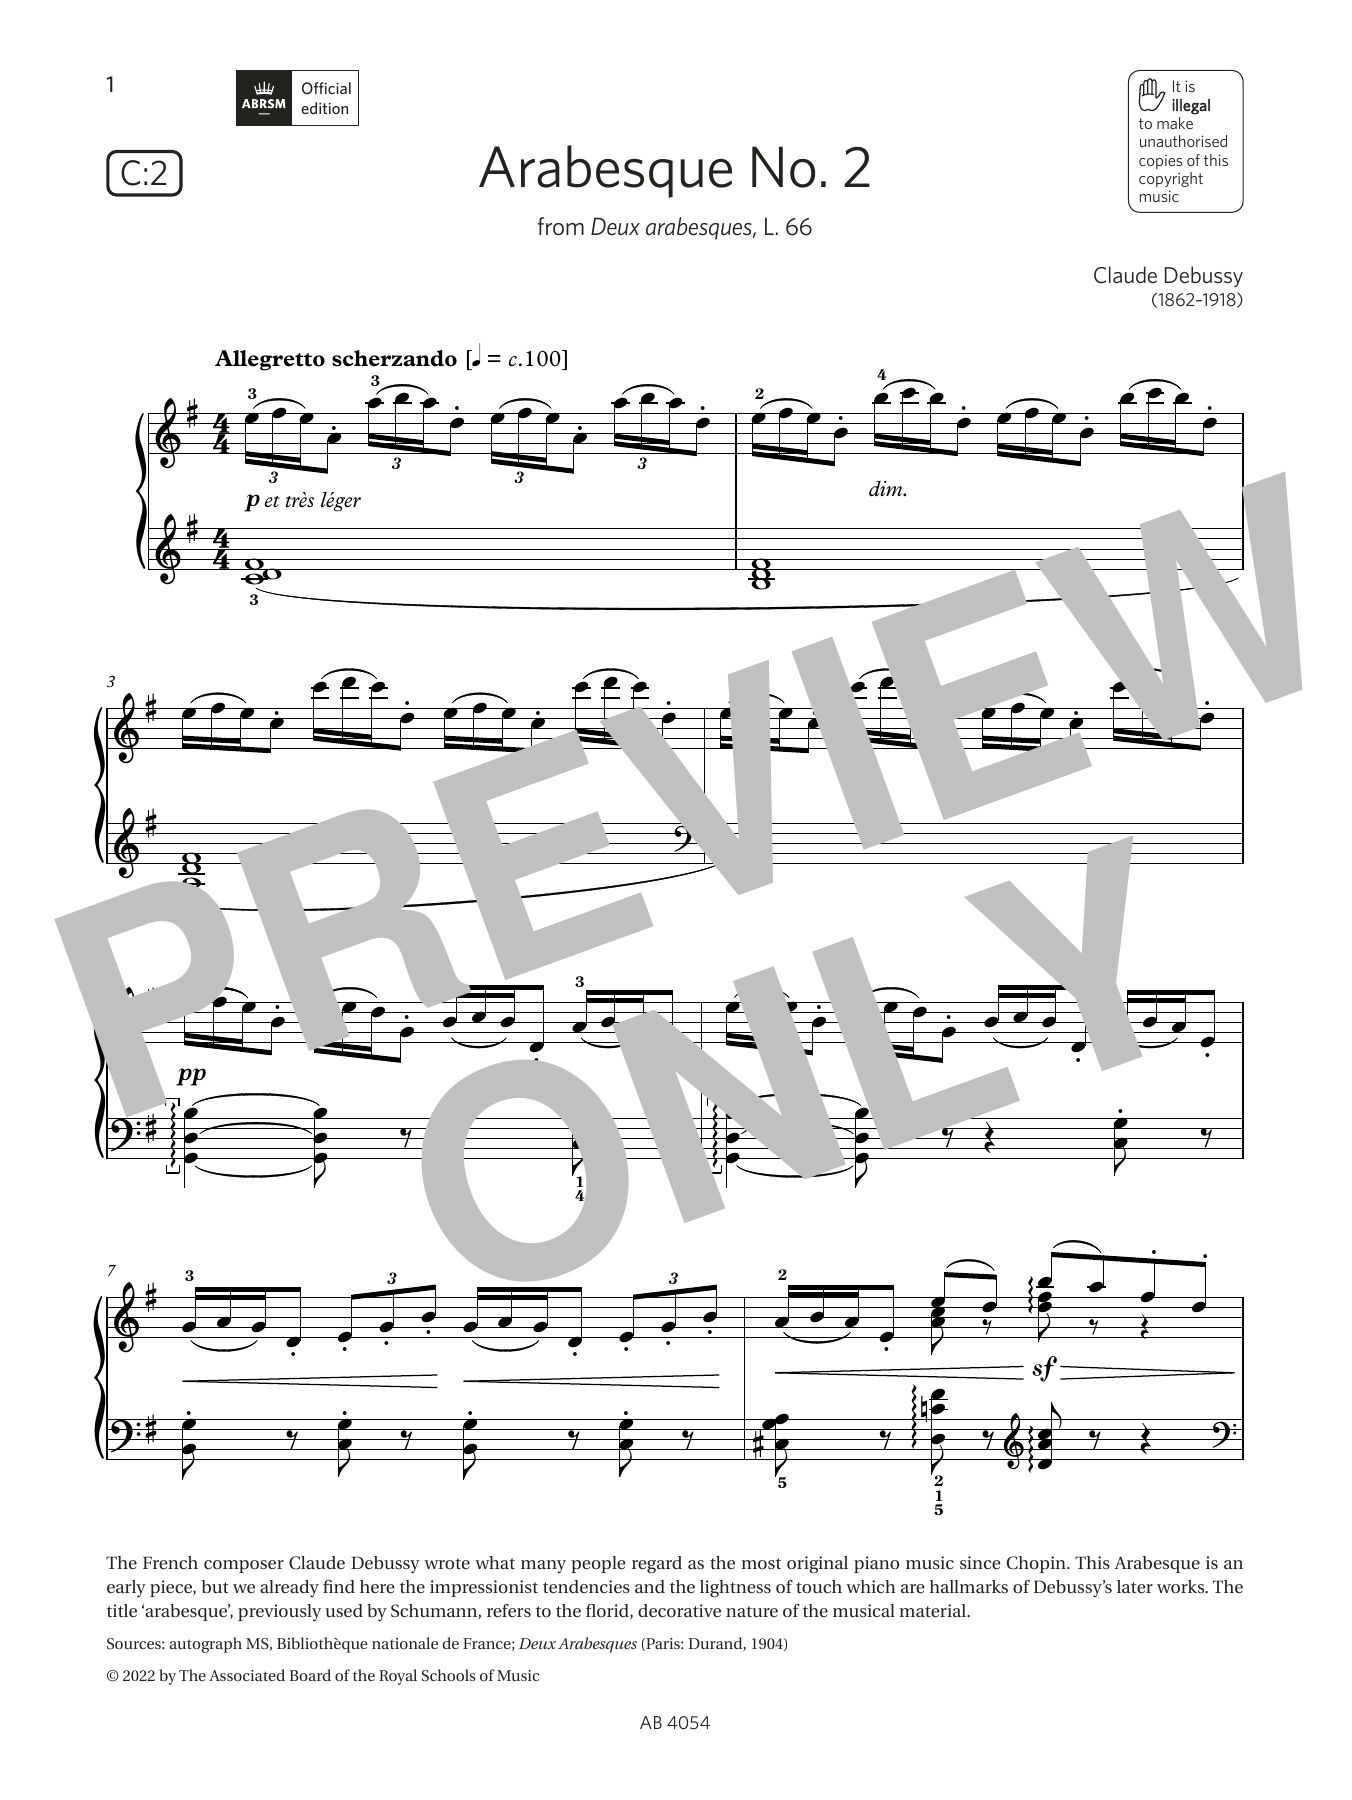 Download Claude Debussy Arabesque No. 2 (Grade 8, list C2, from Sheet Music